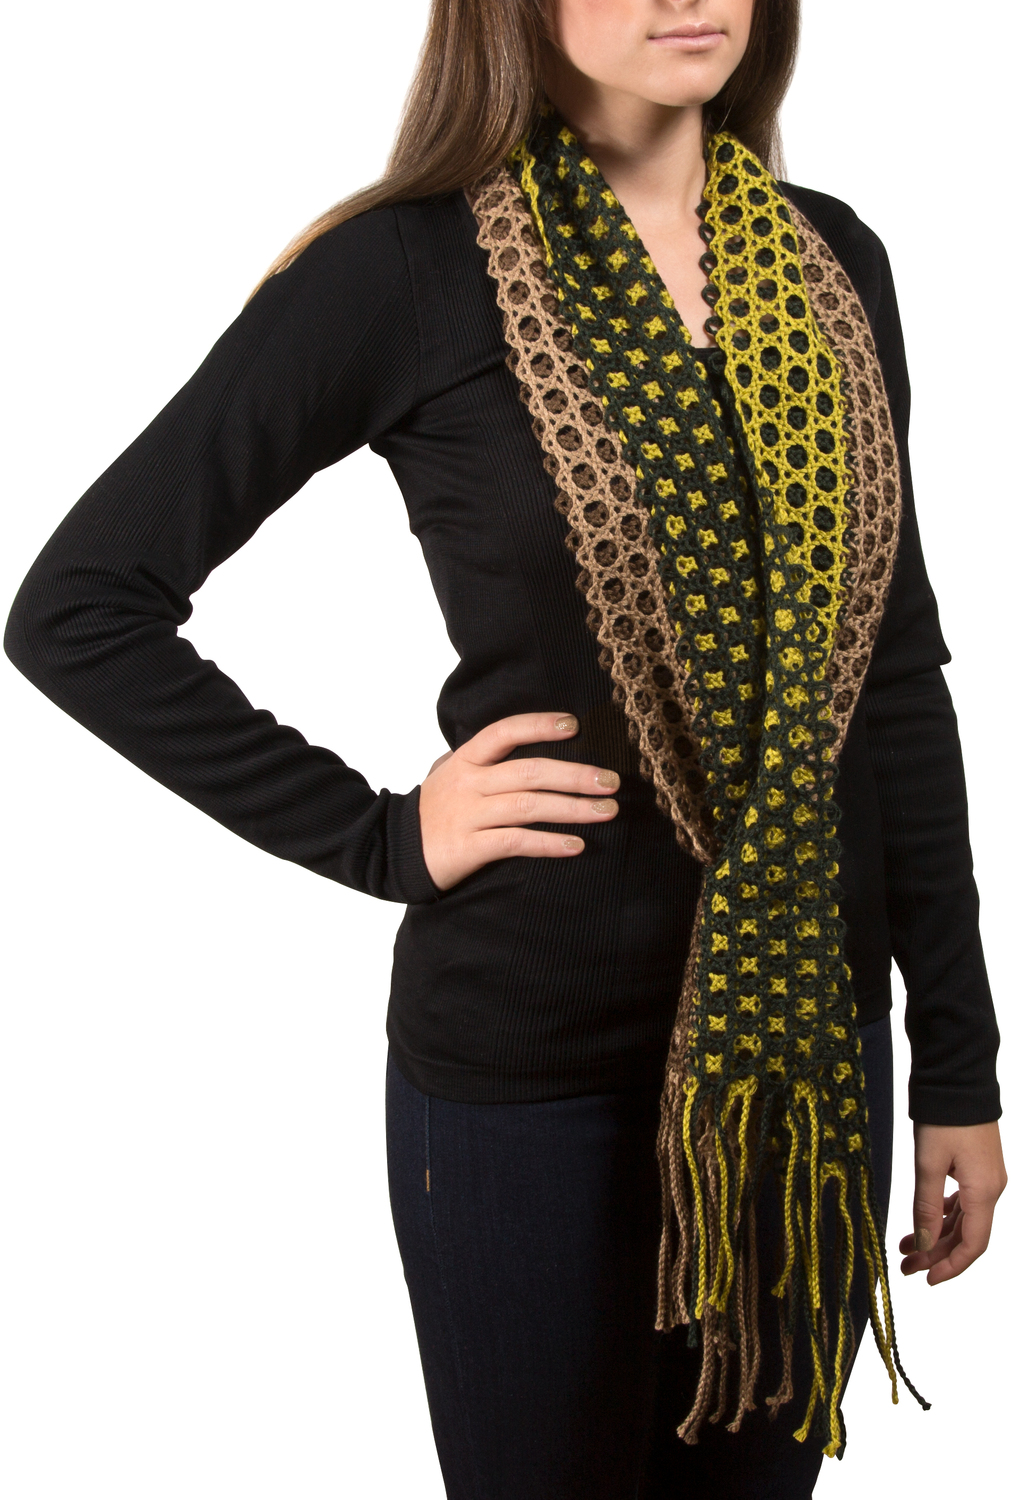 Chartreuse by H2Z Scarves - Chartreuse - Interlocking Scarf